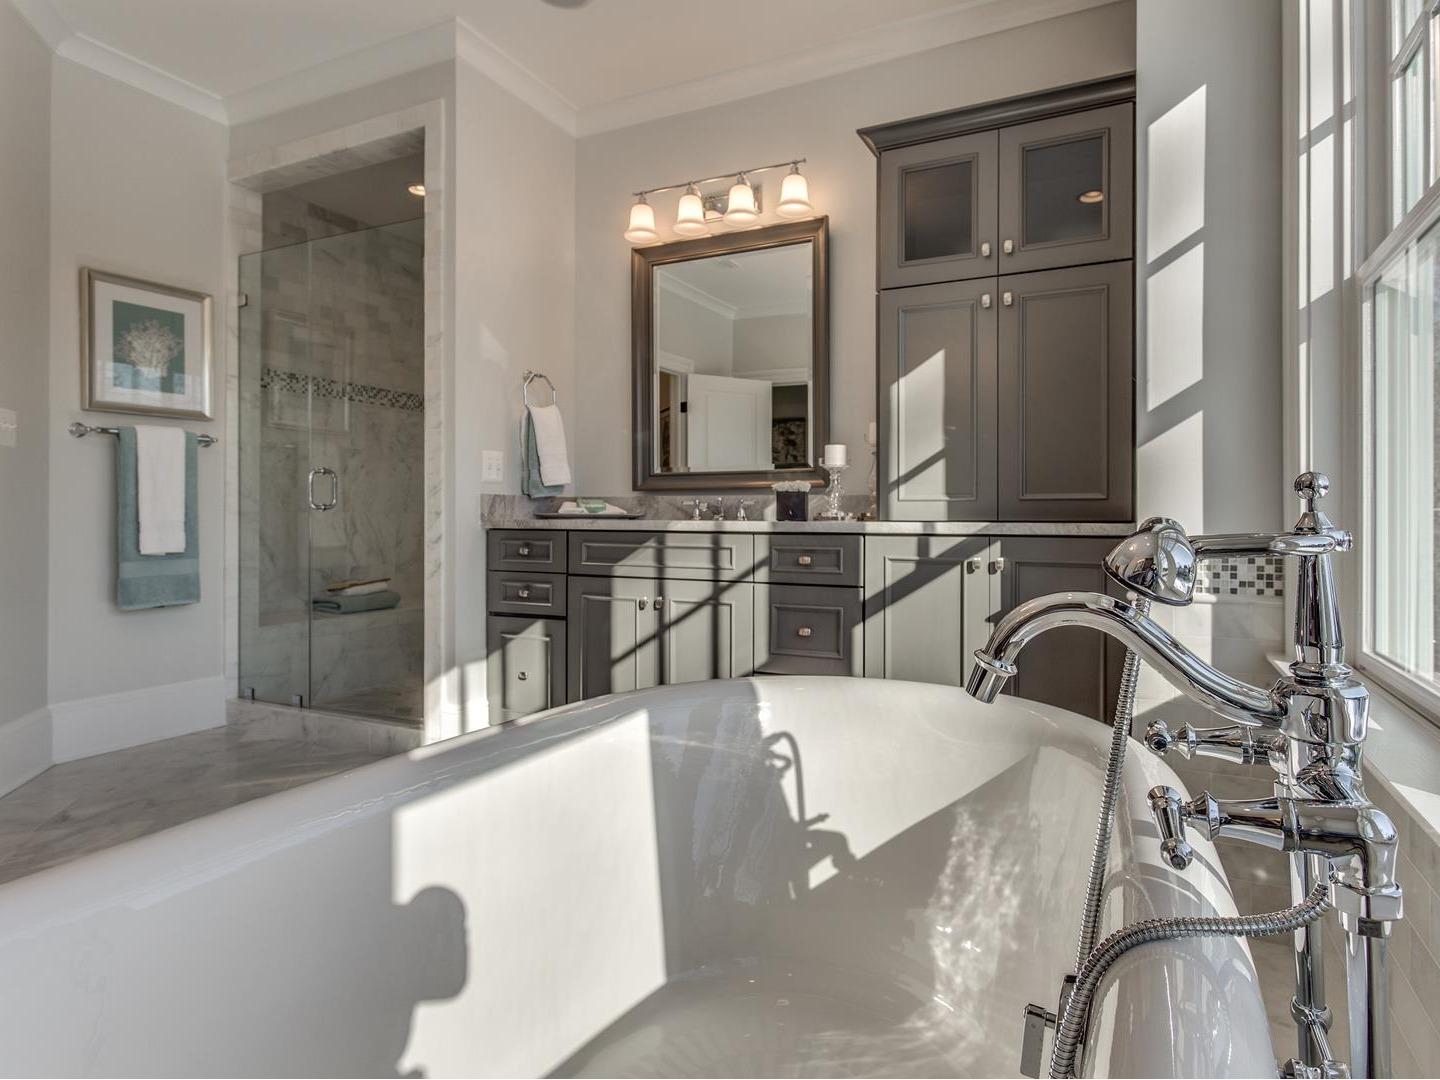 A view from the tub into a design featuring painted grey bathroom vanity cabinets.